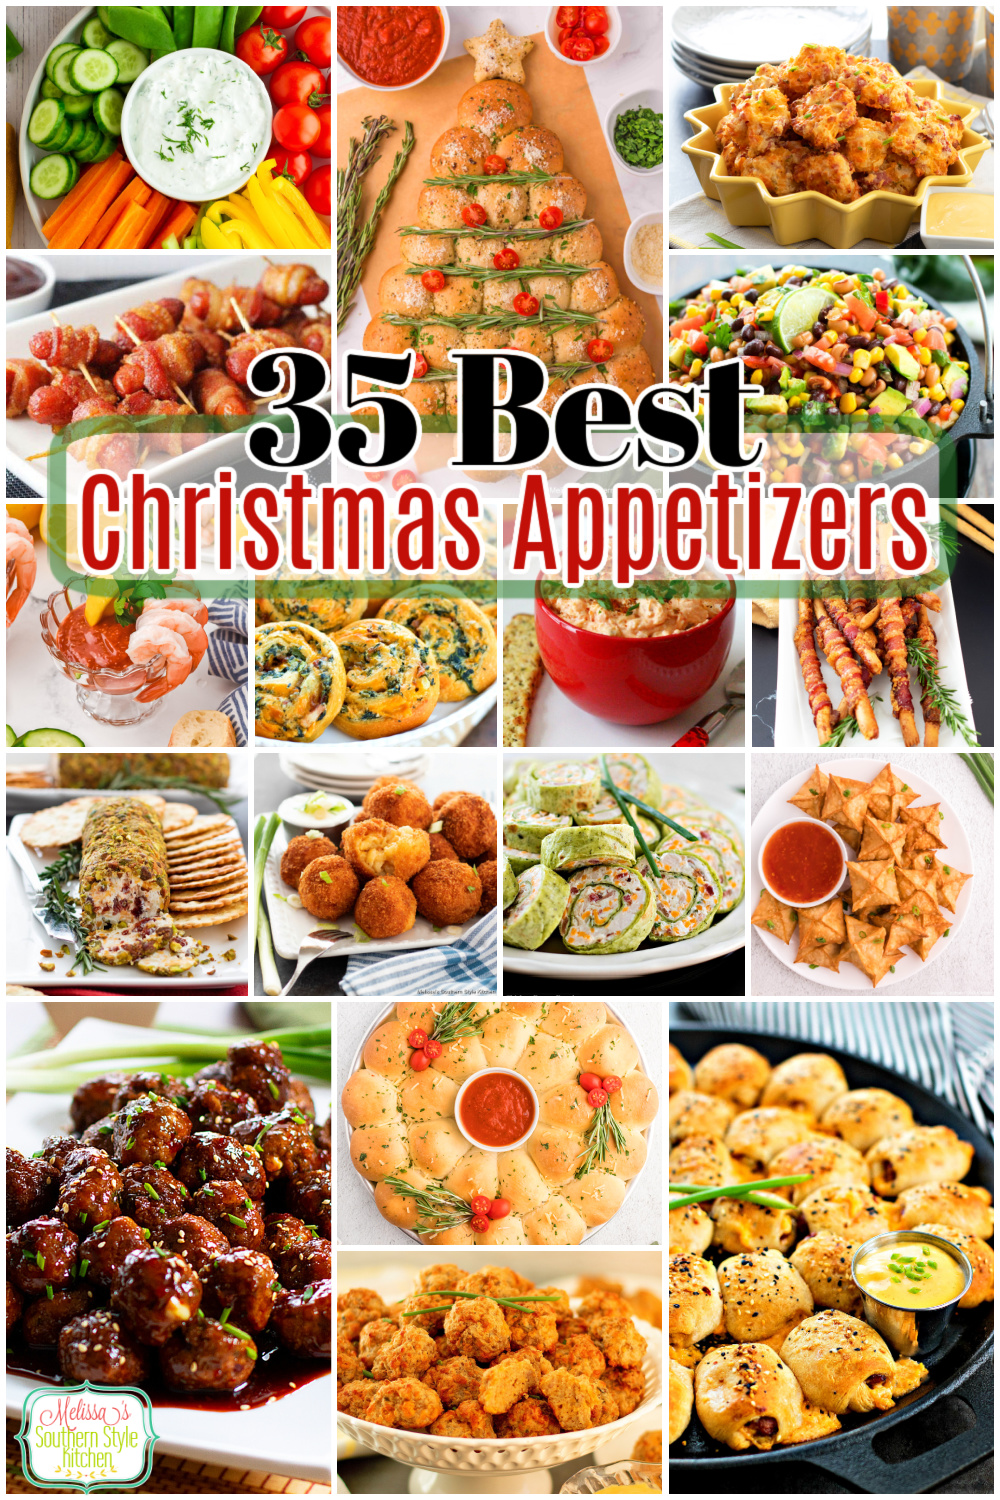 Get the party started with this collection of 35 of the Best Christmas Appetizer Recipes to kick start the holiday celebrations! #christmasappetizers #appetizerrecipes #christmasrecipes #easyappetizers via @melissasssk